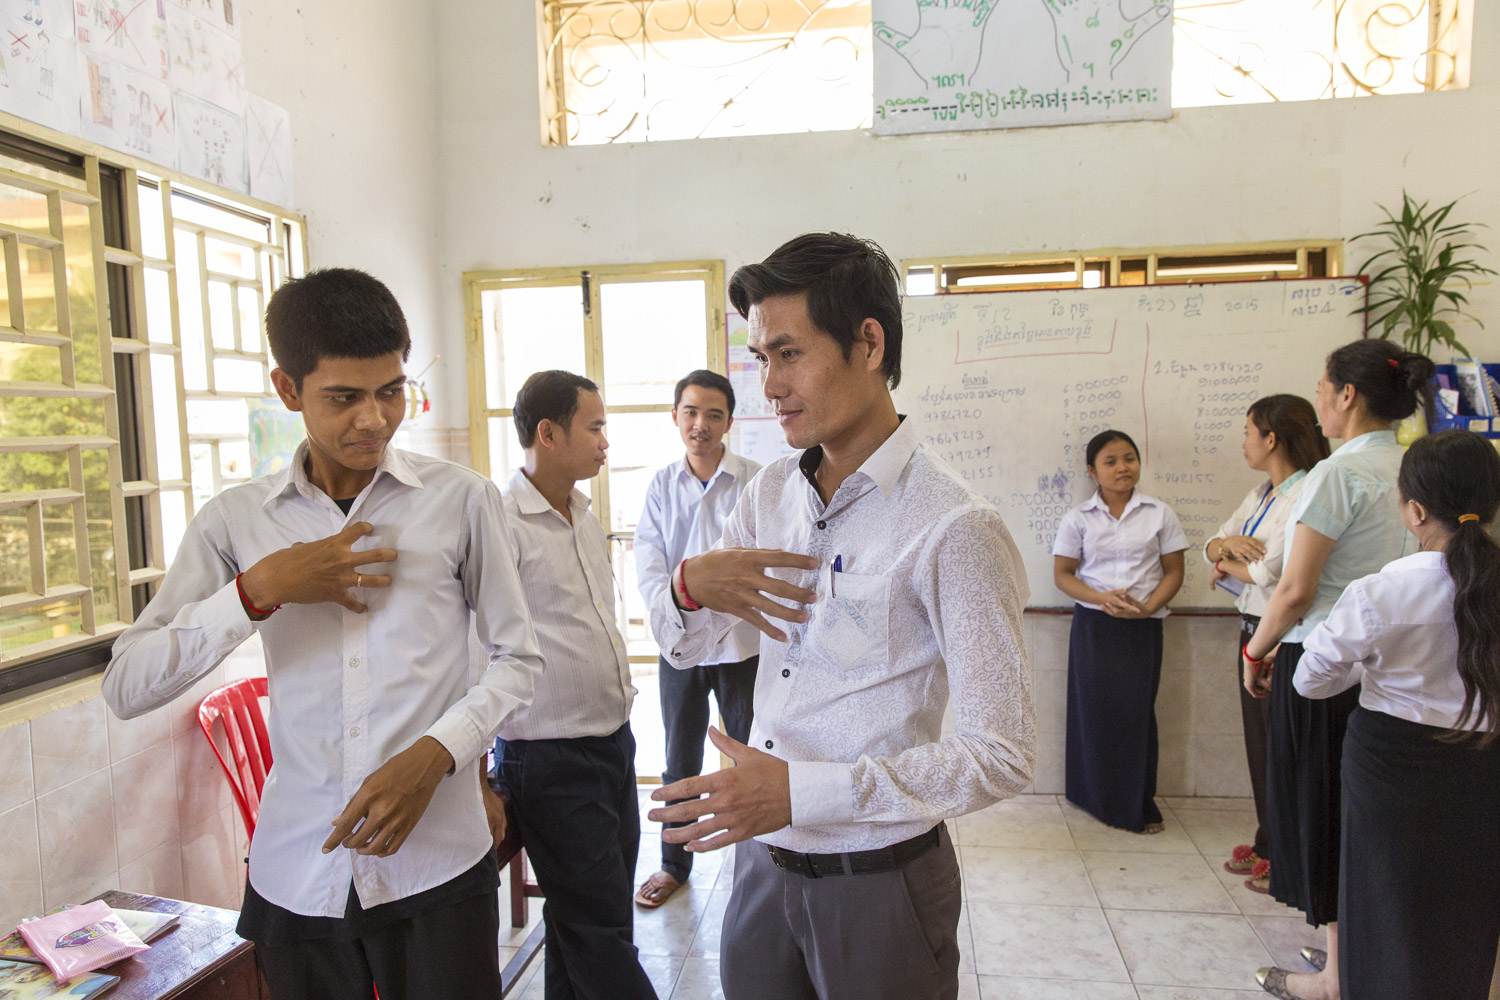  Sopor Lay (middle) a graduate of DDP's program is now a teacher at their Phnom Penh center. 